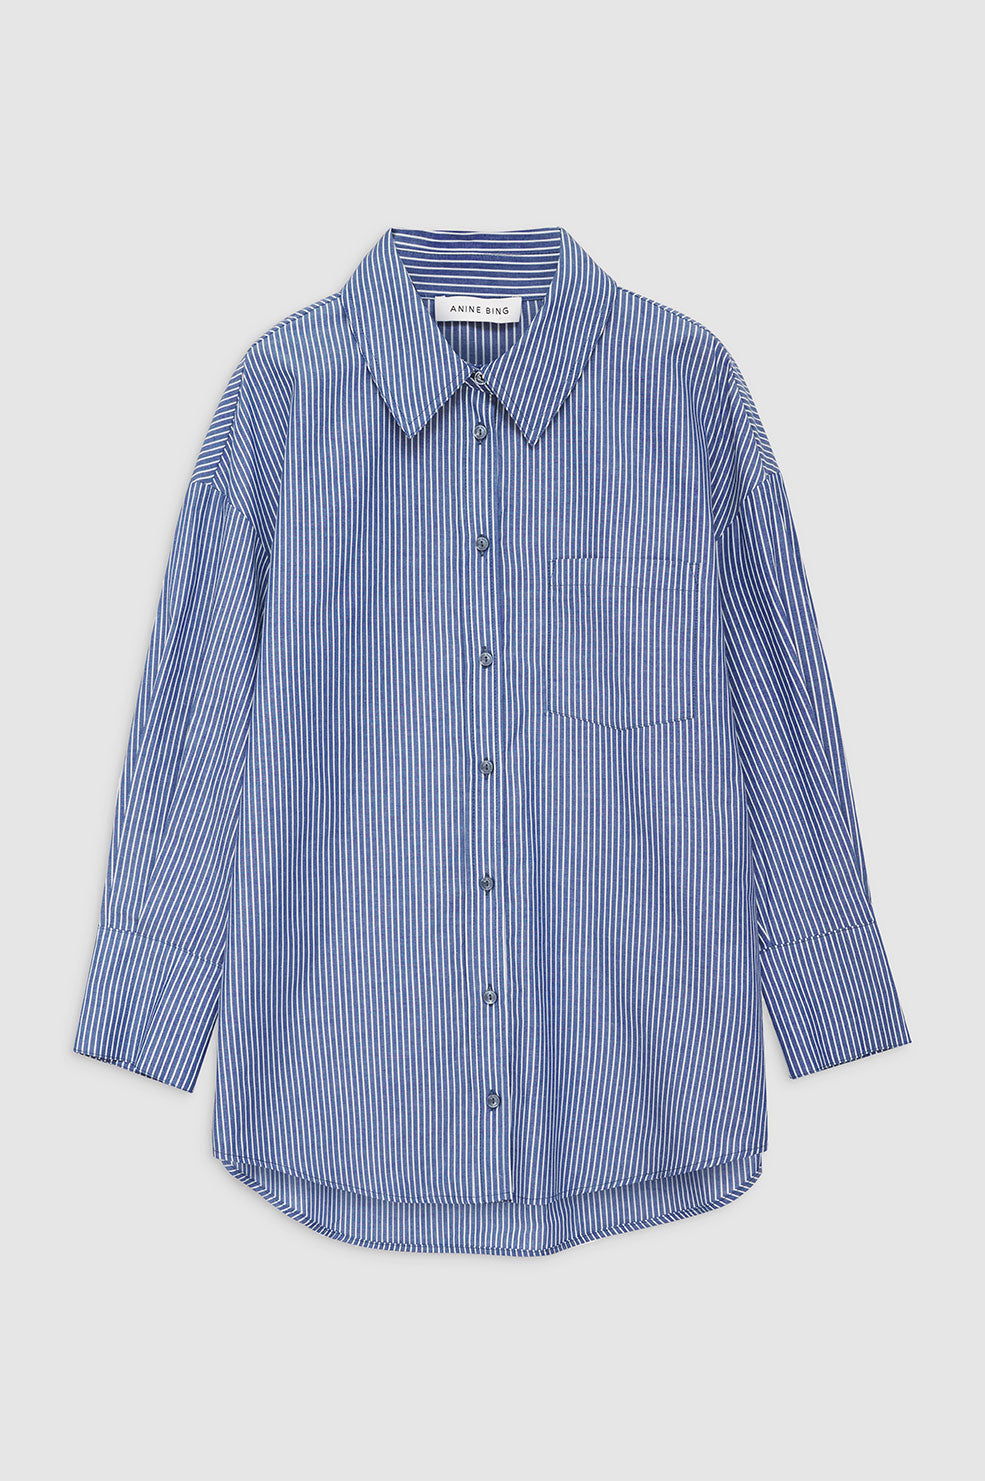 ANINE BING Mika Shirt - Blue And White Stripe - Front View